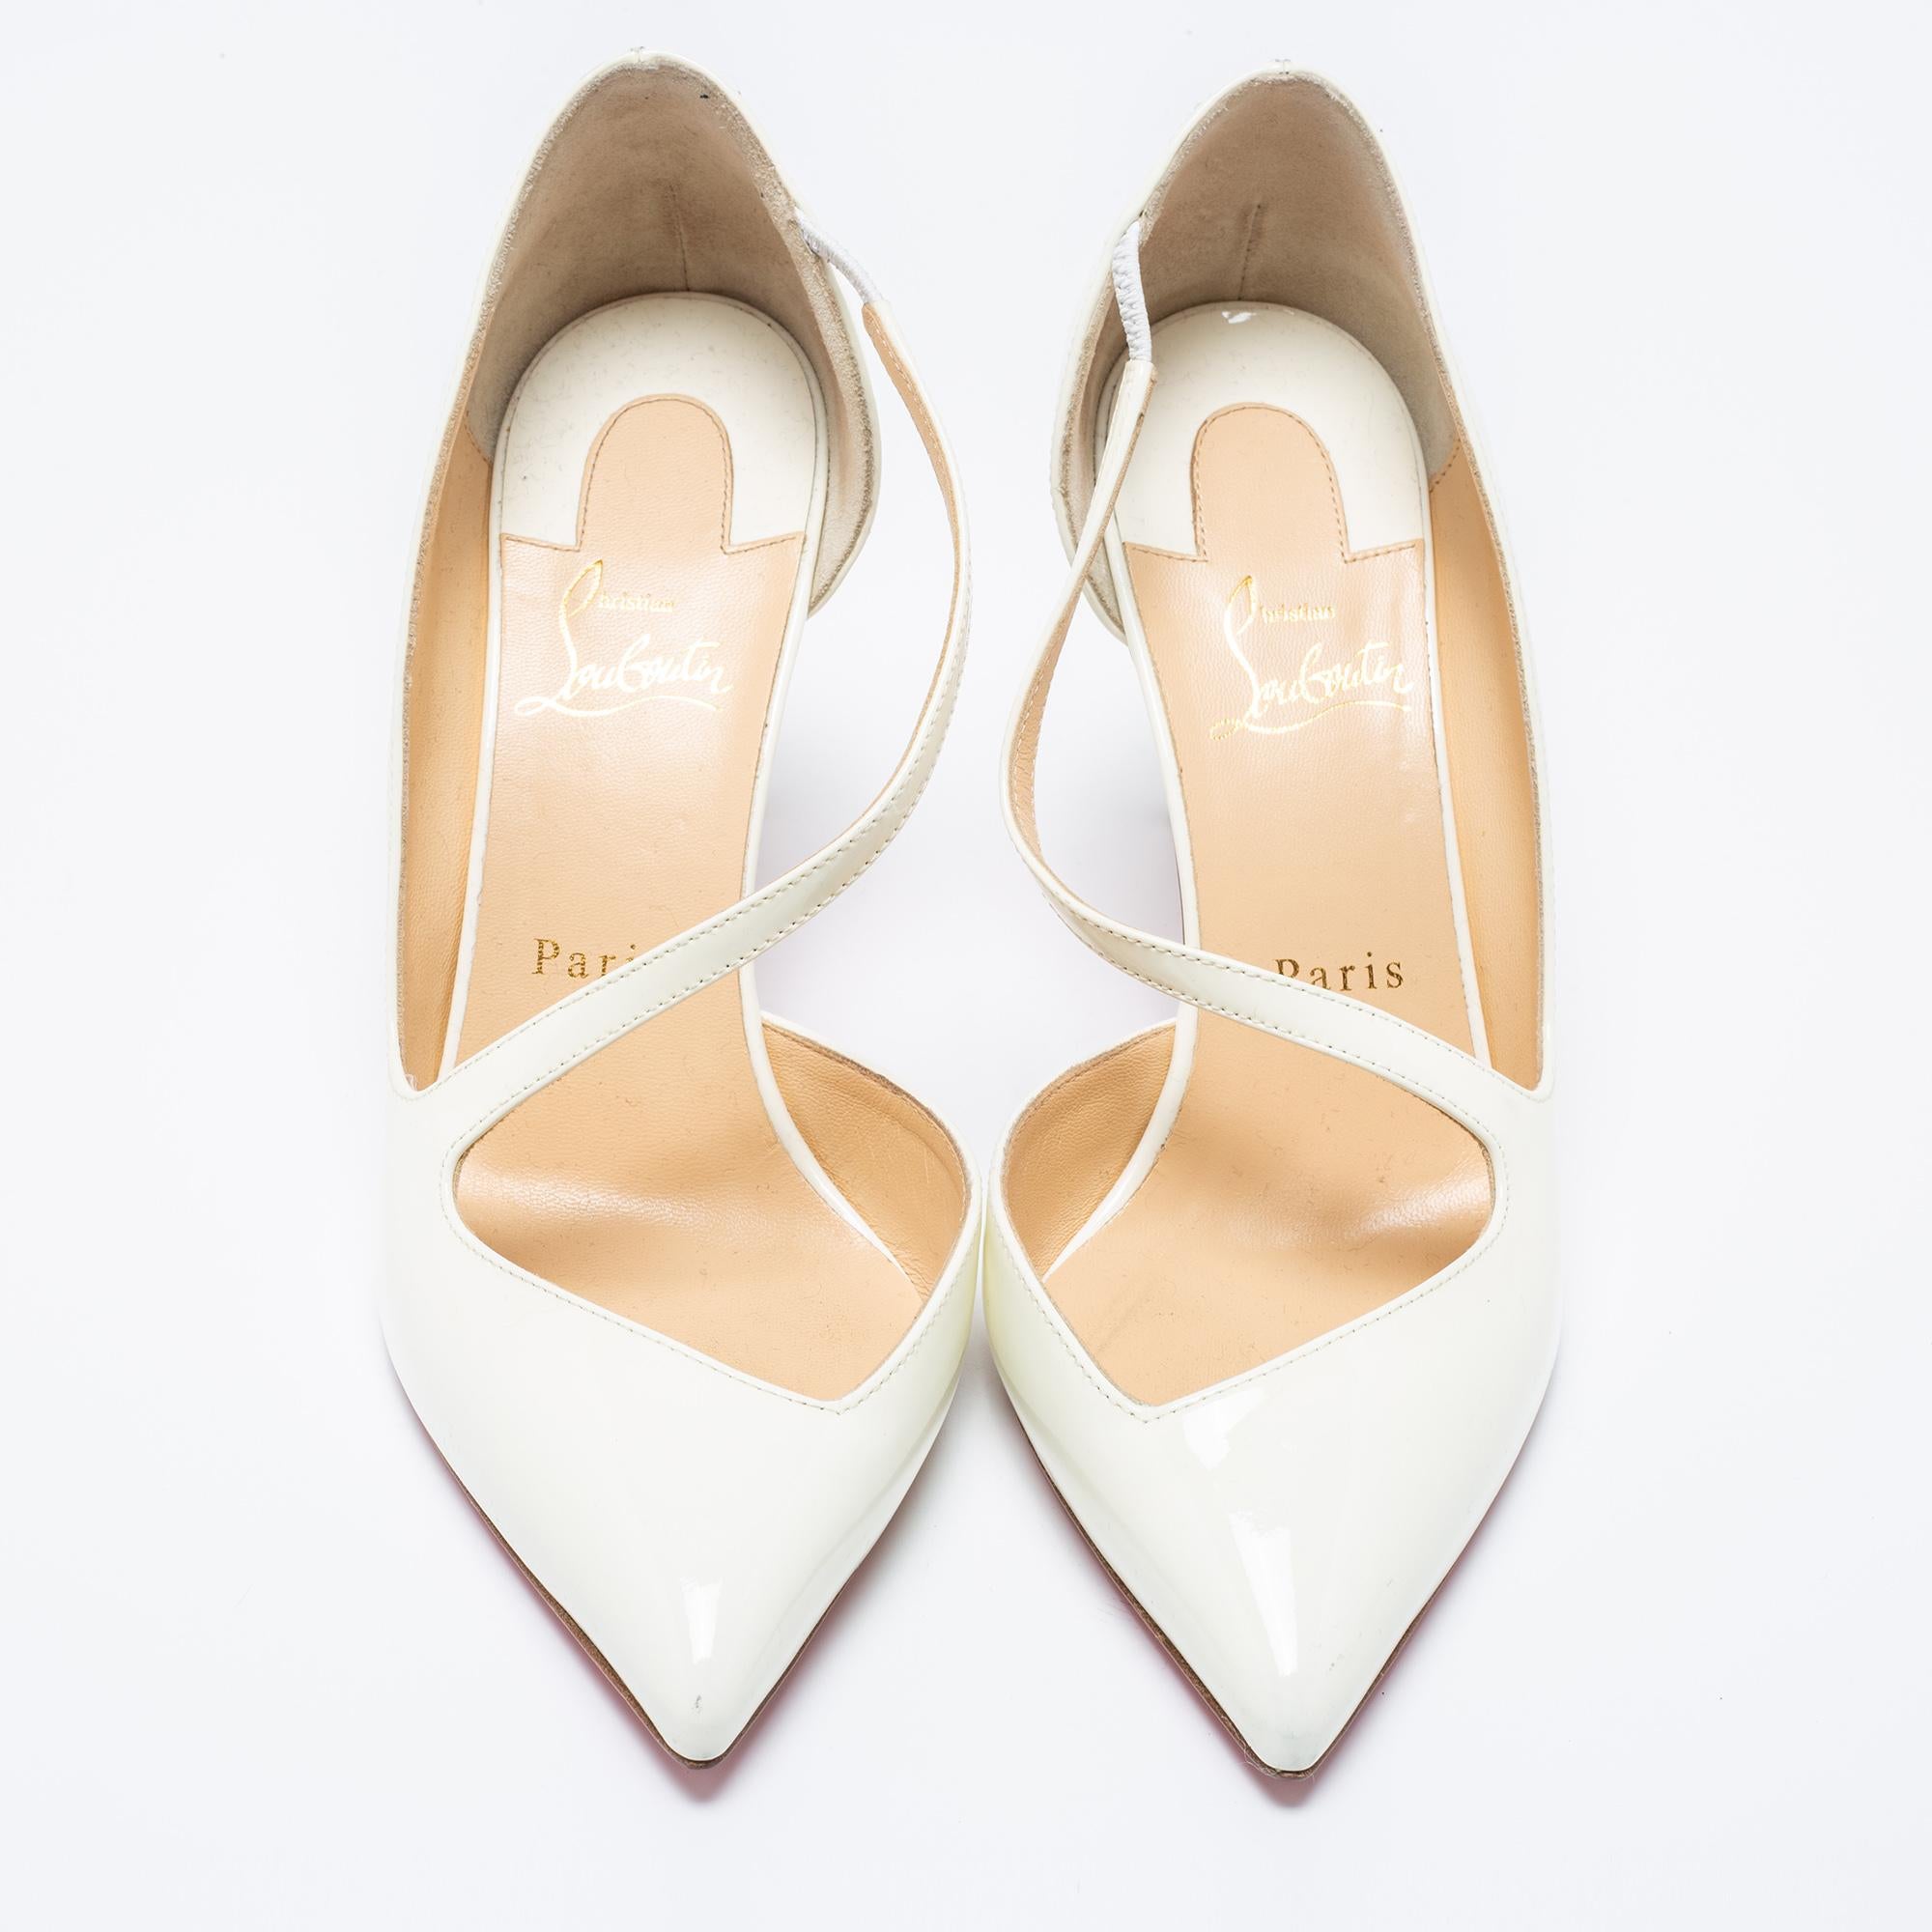 The perfectly placed d'Orsay cut of this pair of Christian Louboutin Iriza pumps exemplifies the brand's mastery in shoemaking. Created from patent leather, it stands elegantly on sleek 8.5cm heels and embodies a sharp silhouette. The signature